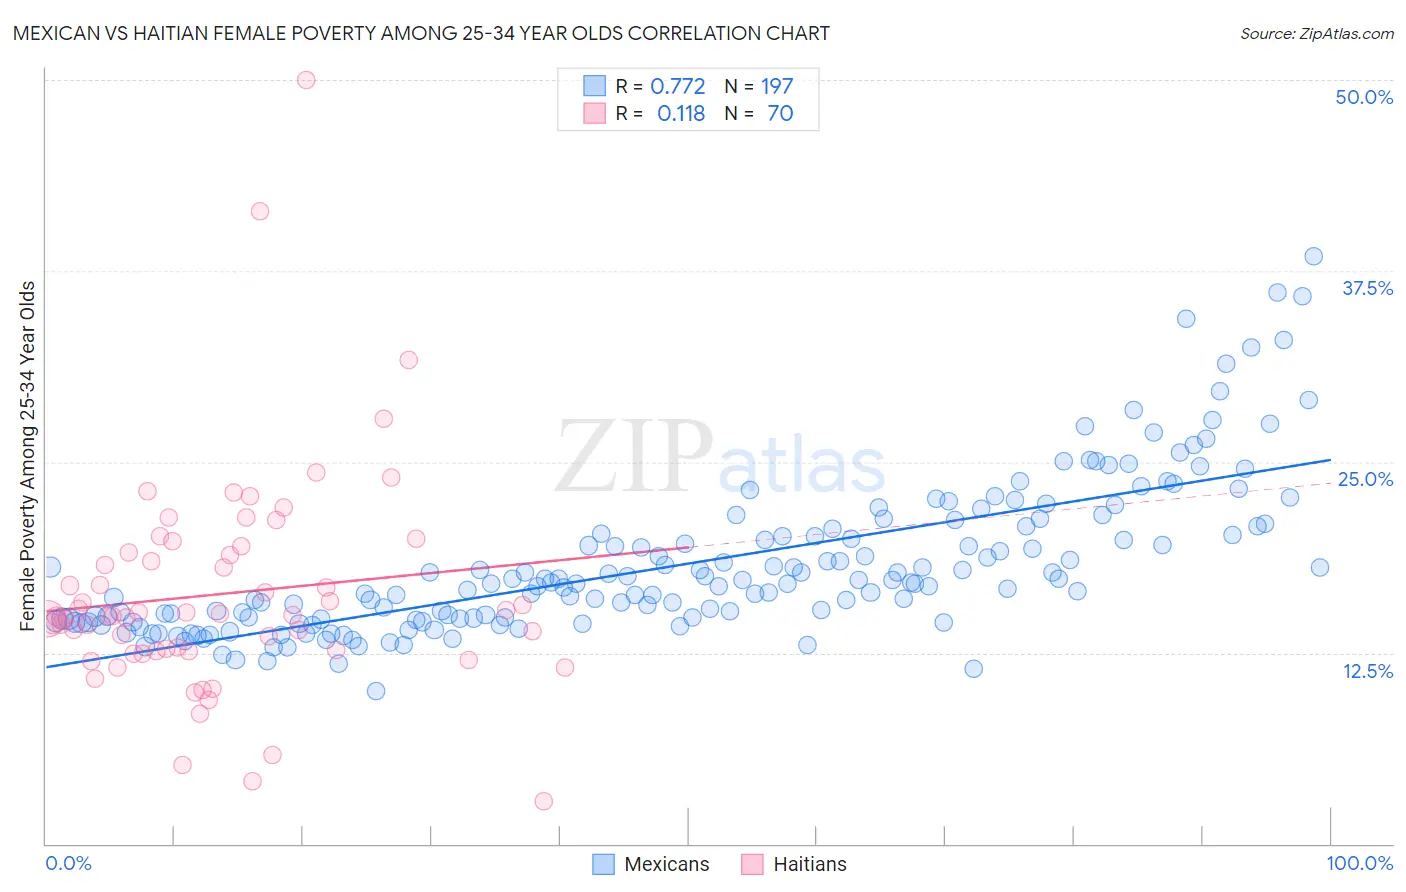 Mexican vs Haitian Female Poverty Among 25-34 Year Olds